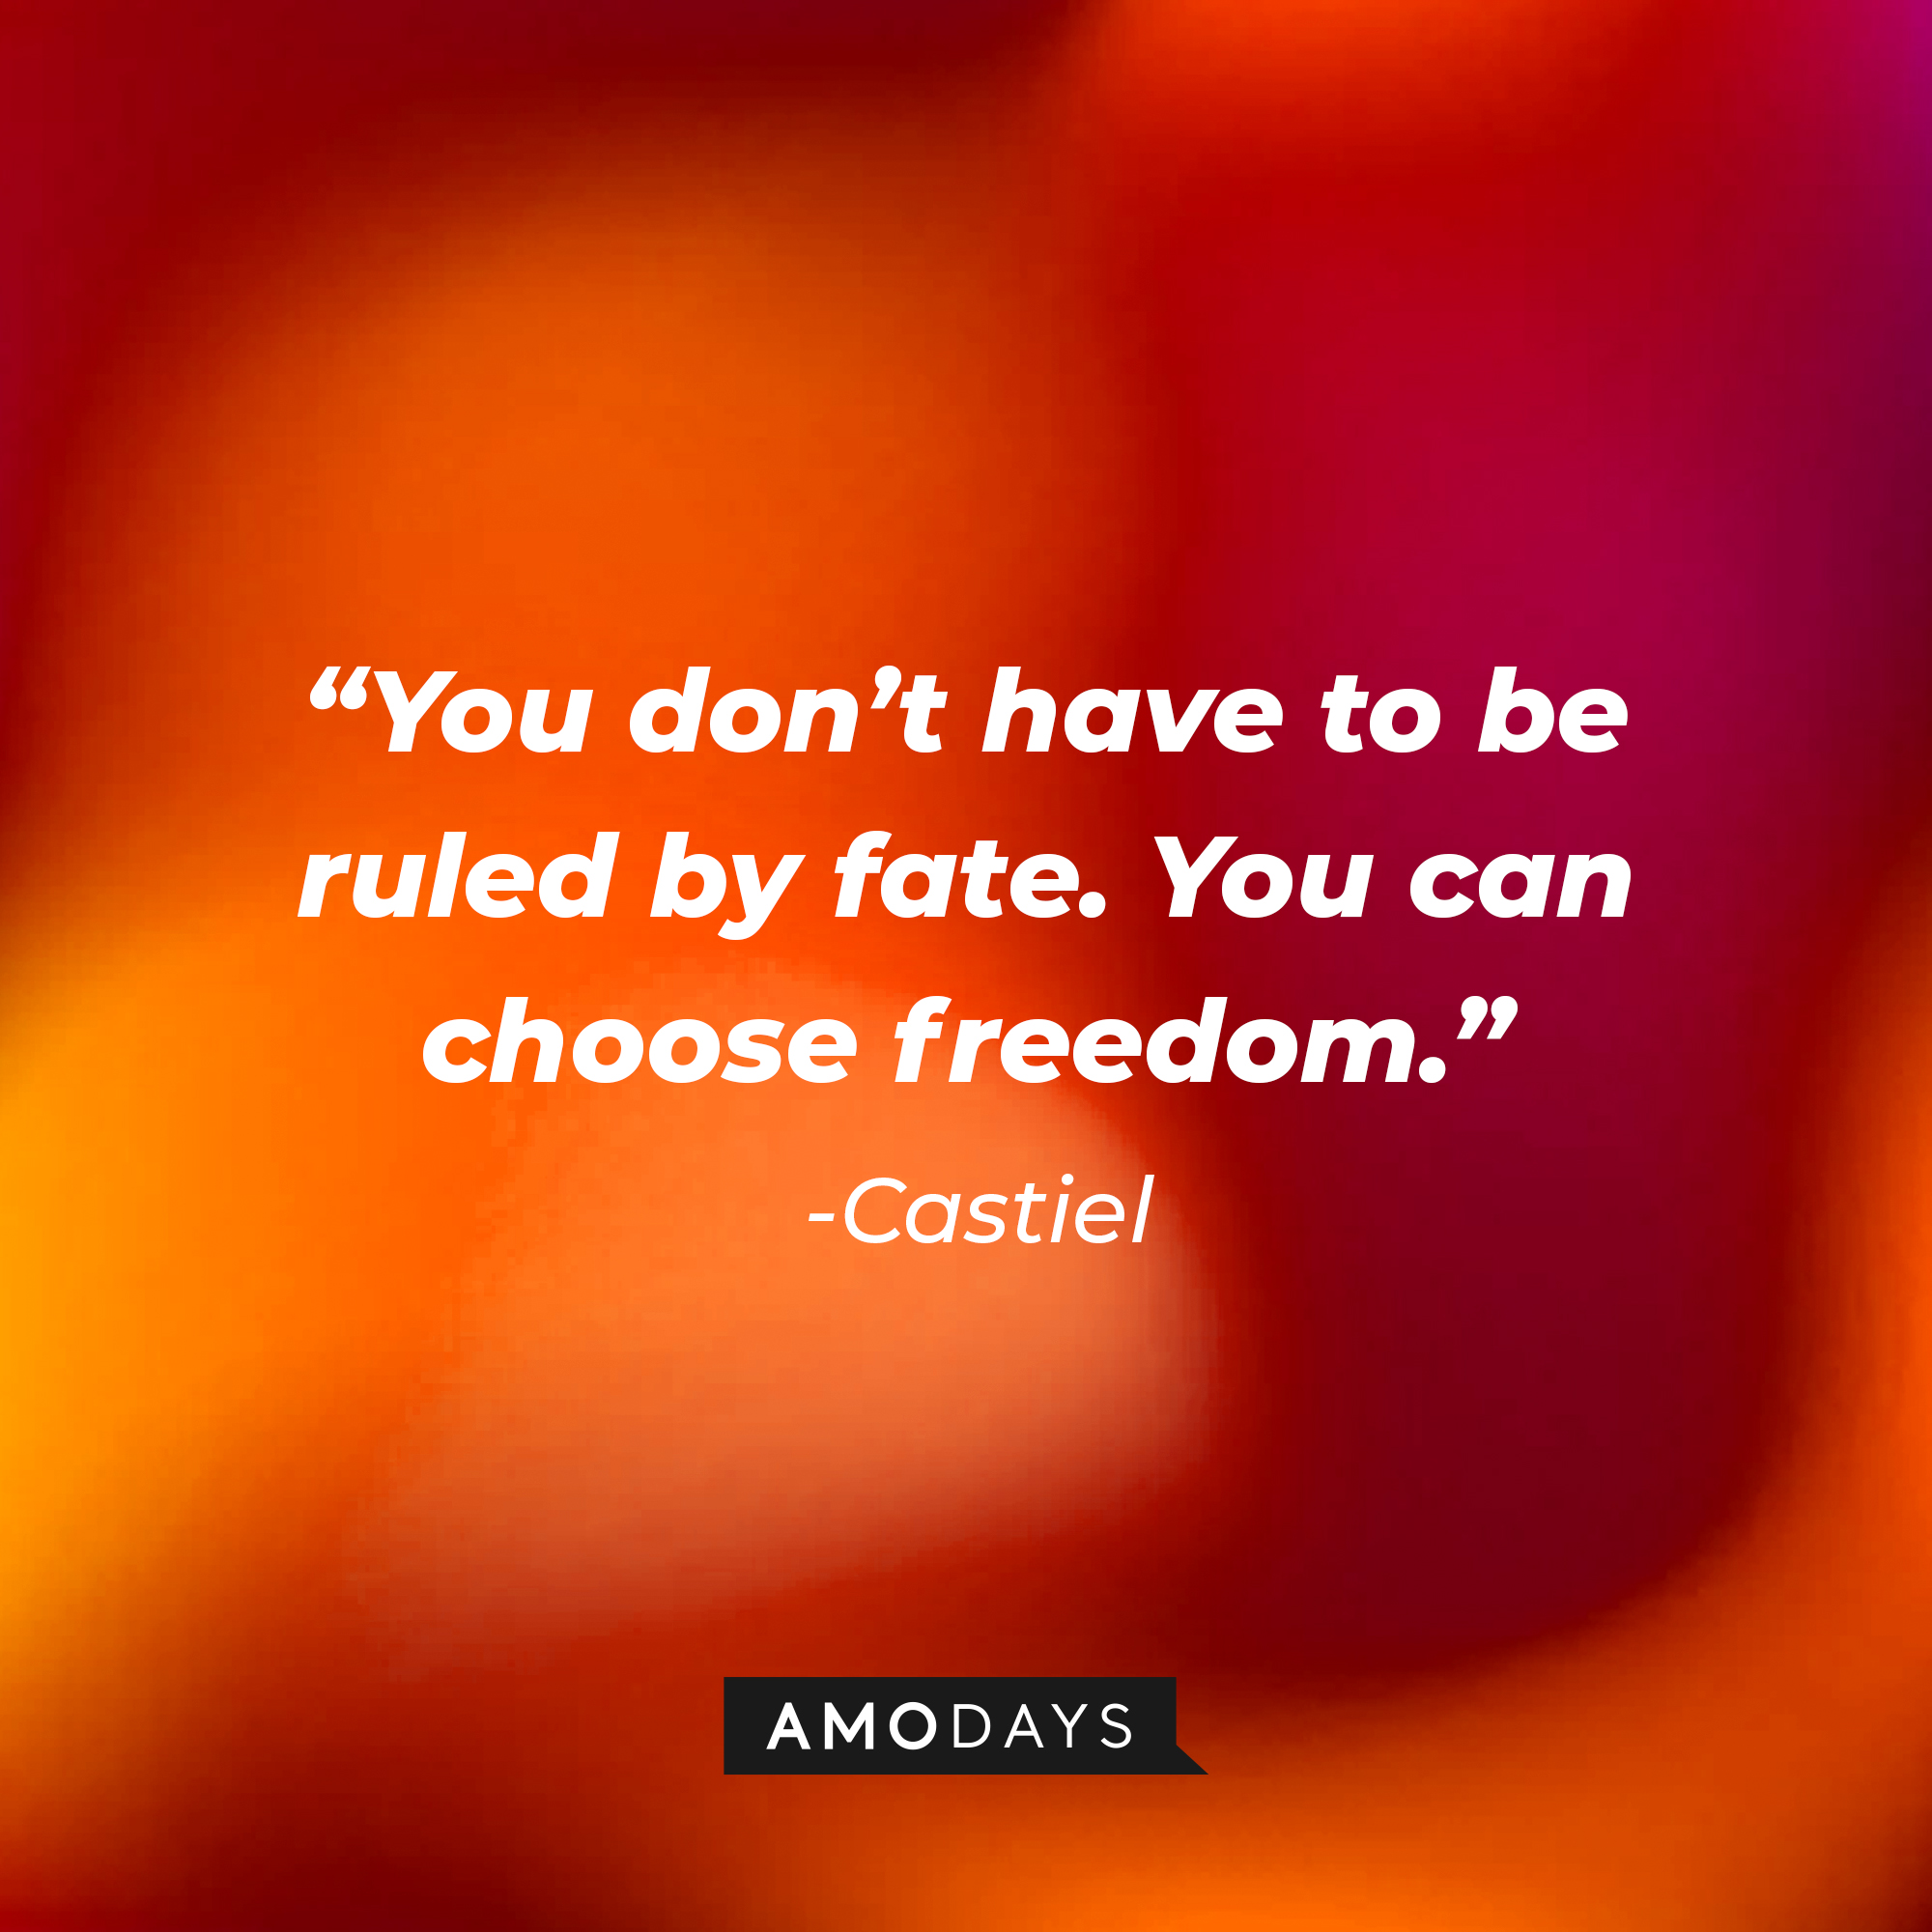 Castiel’s quote: “You don’t have to be ruled by fate. You can choose freedom.” | Source: AmoDays